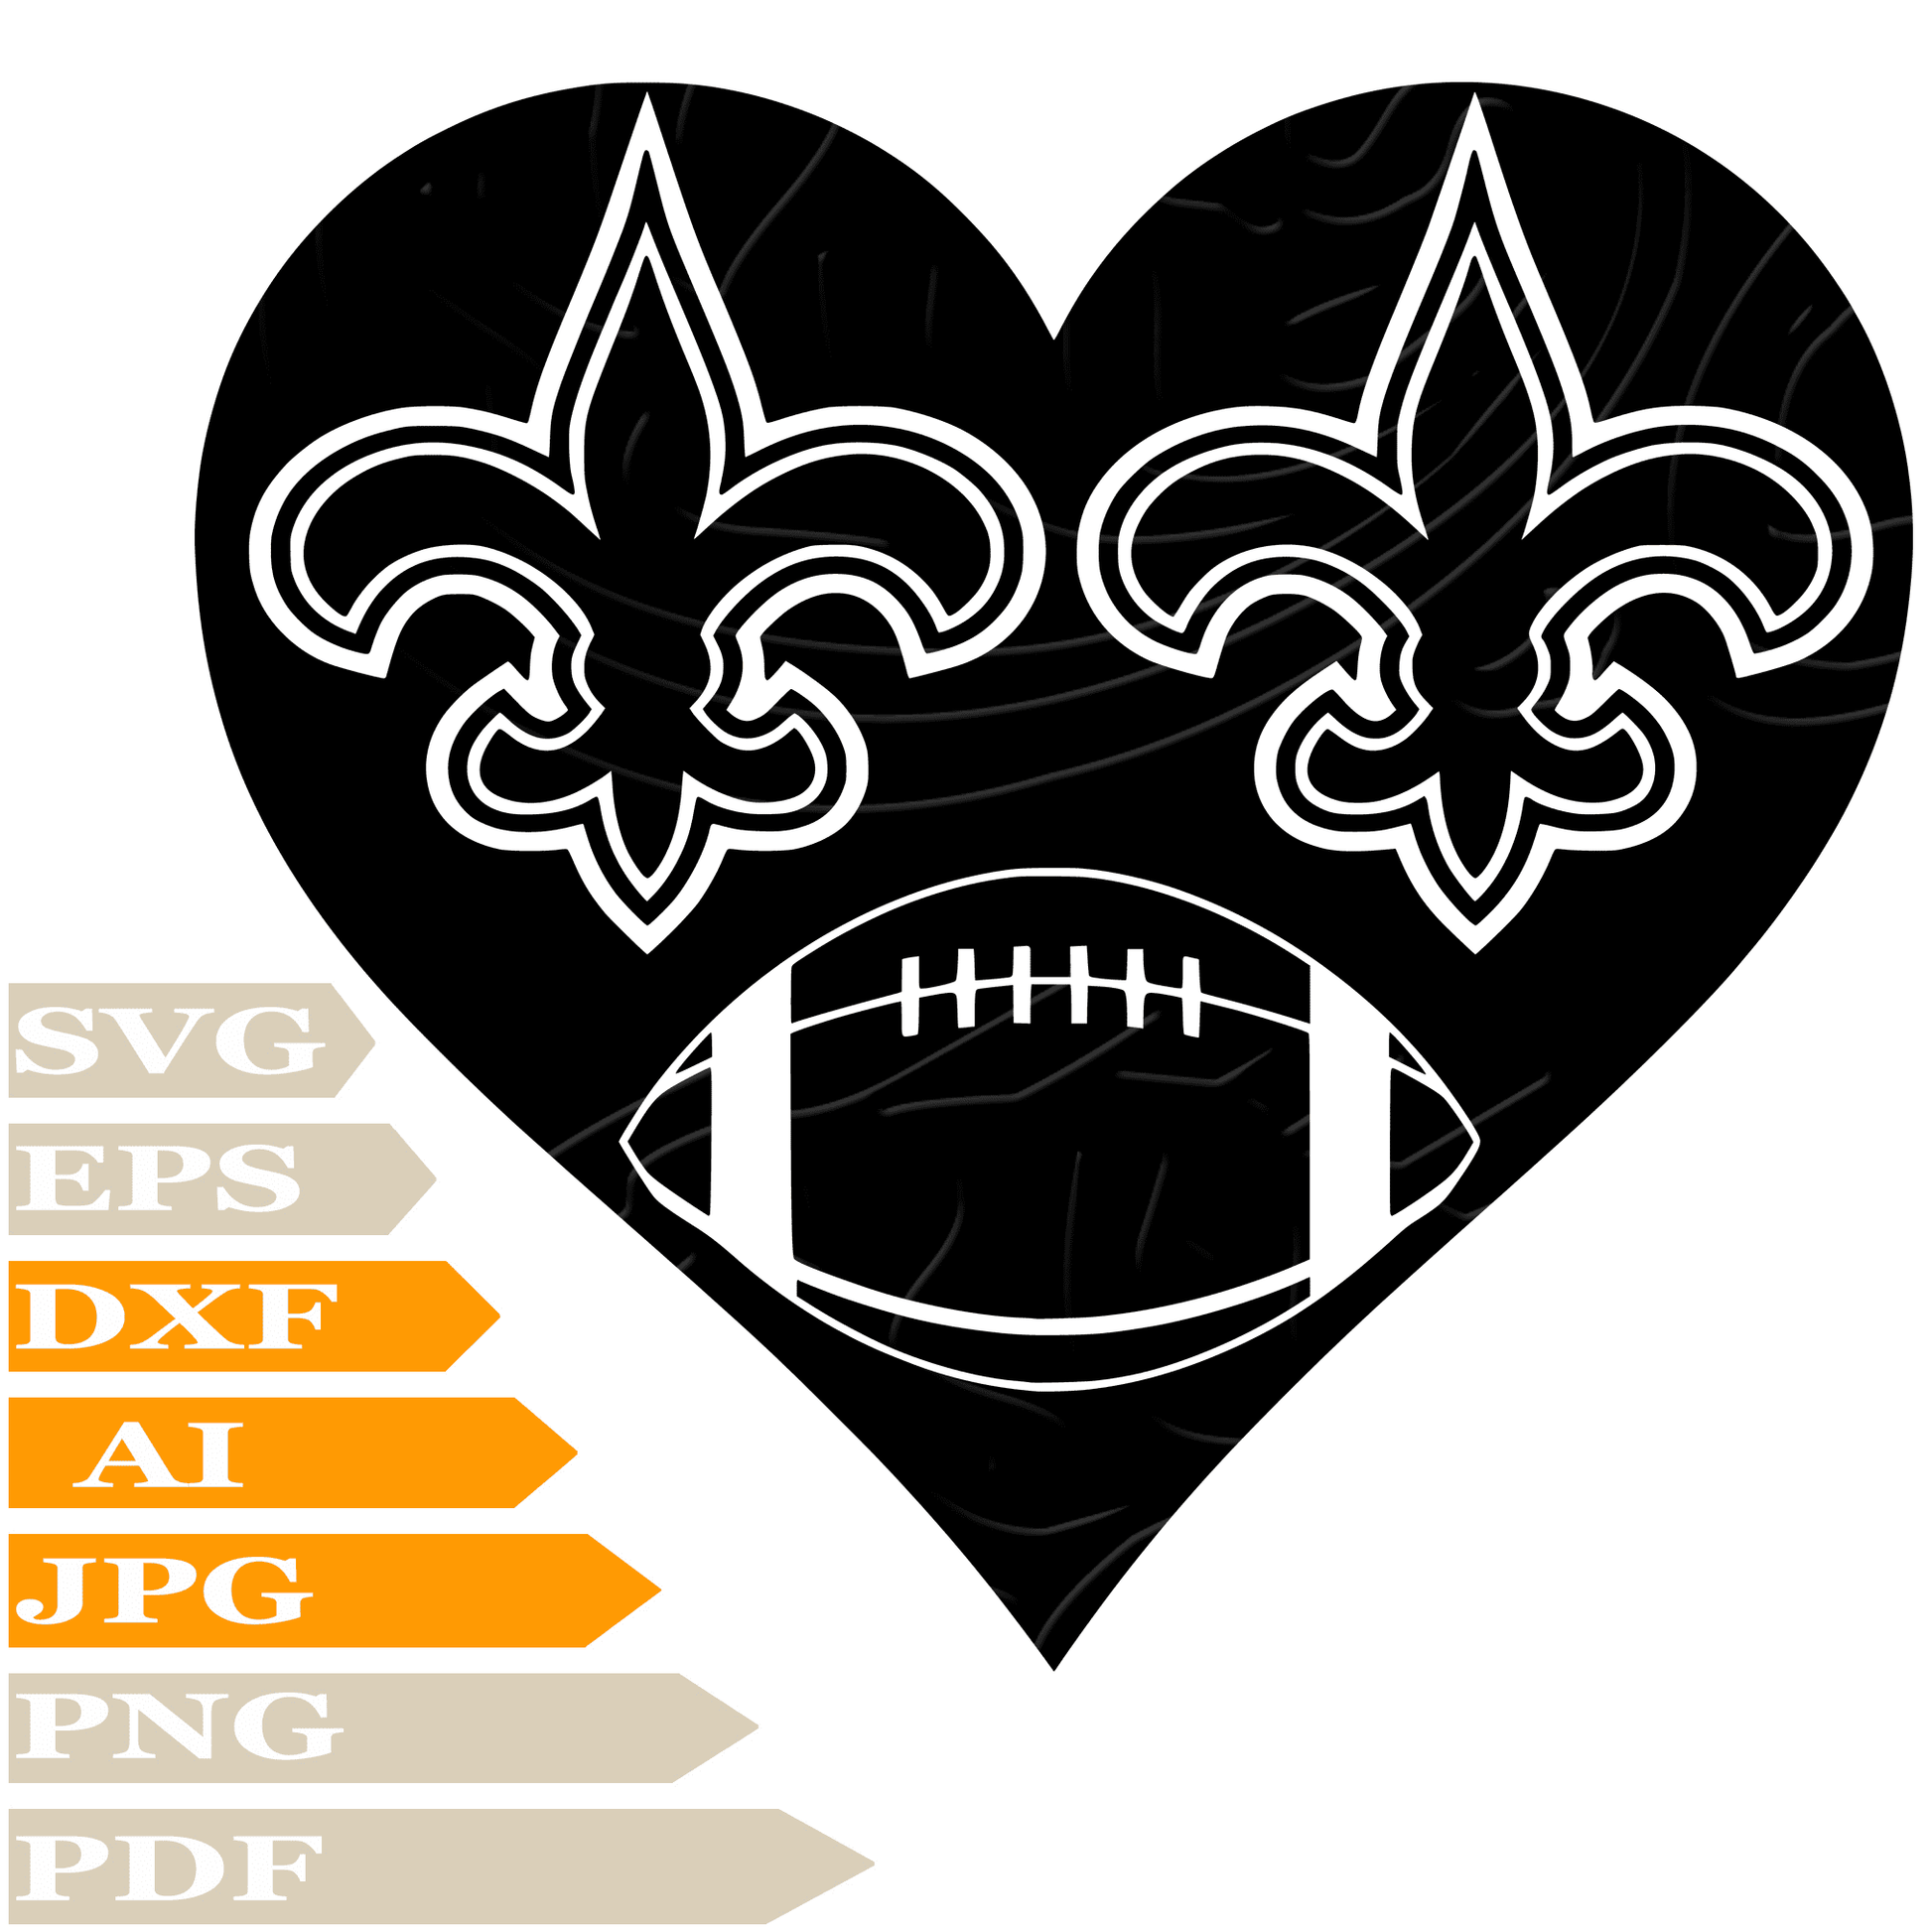 Heart New Orleans Saints SVG-Saints Football Personalized SVG-New Orleans Saints Team Logo Drawing SVG-New Orleans Saints Team Mascot Vector ClipArt's-SVG Cut Files-Illustration-PNG-Decal-Circuit-Digital Files-For Shirts-Silhouette